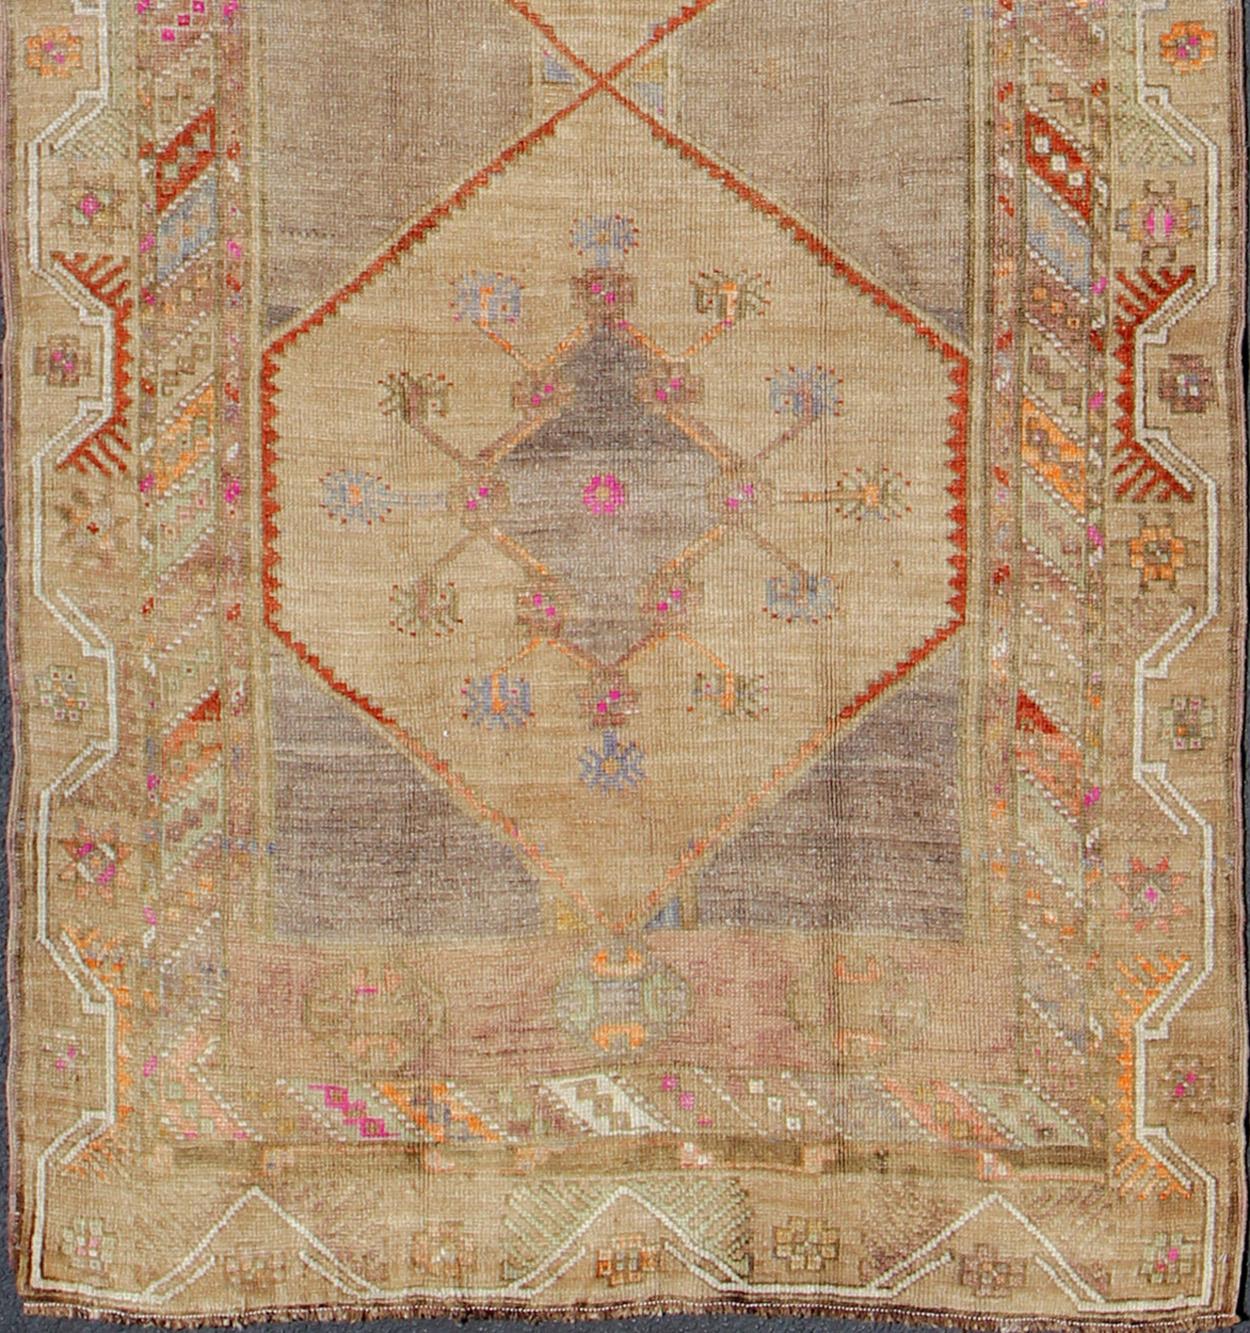 Vintage Oushak rug from Turkey with Tribal Geometric design, rug TU-UGU-4807, country of origin / type: Turkey / Oushak, circa 1930

This Turkish carpet from 2nd quarter of 20th century Turkey features four hexagon-shaped medallions expanding